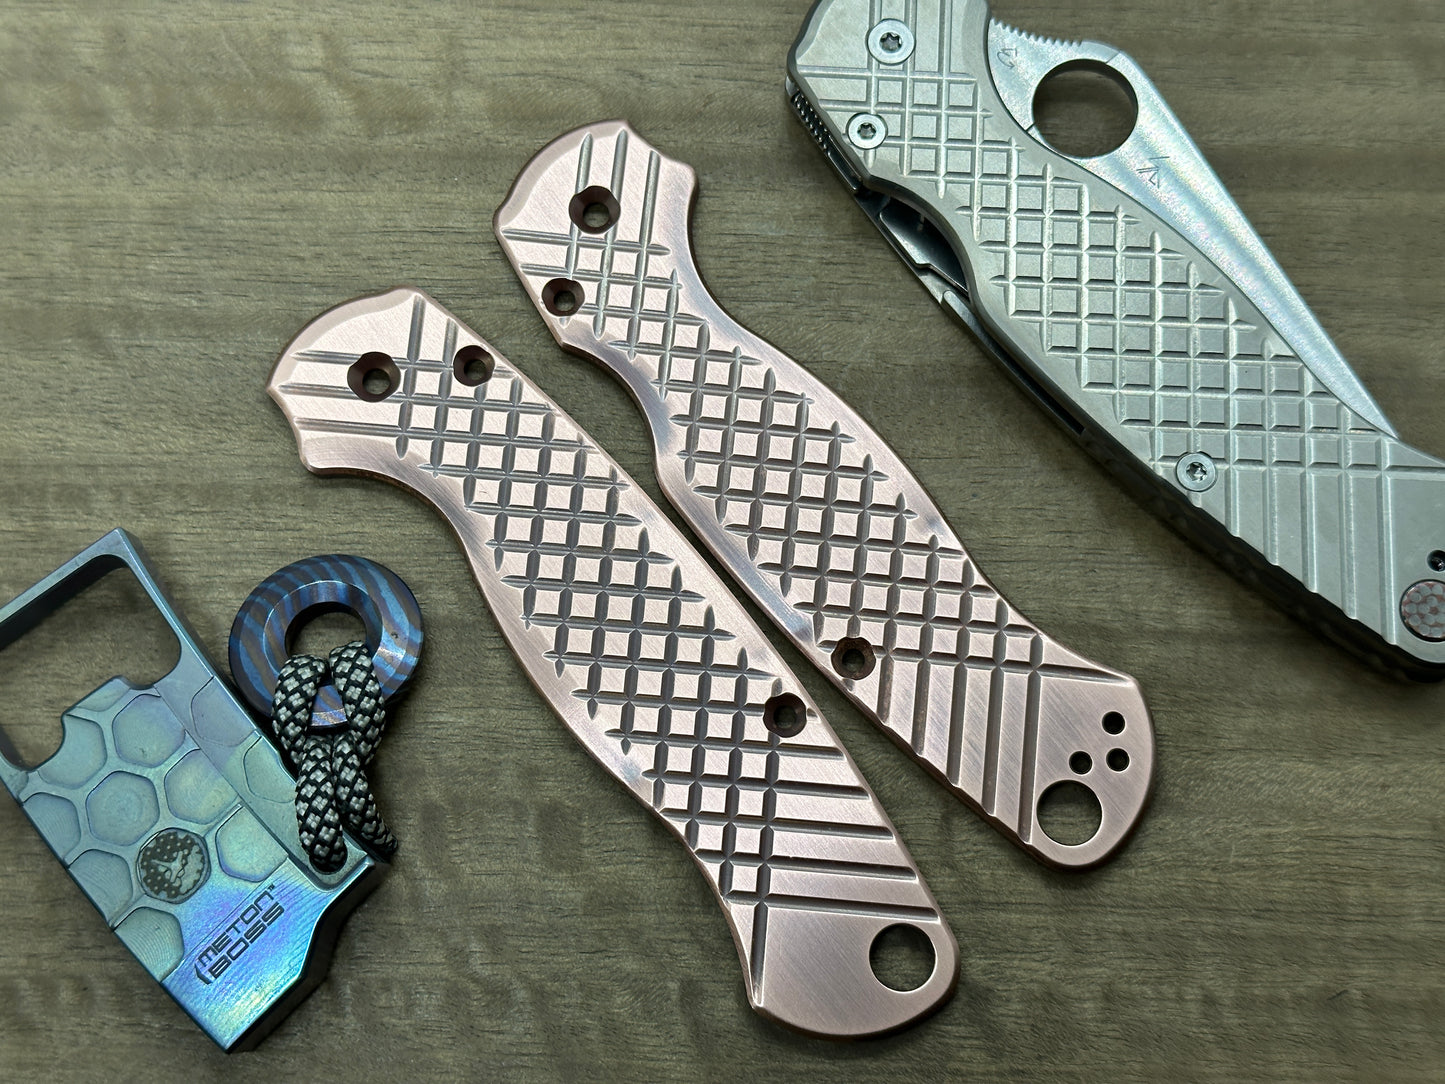 FRAG milled 2-Tone Dark & Brushed Copper Scales for Spyderco Paramilitary 2 PM2